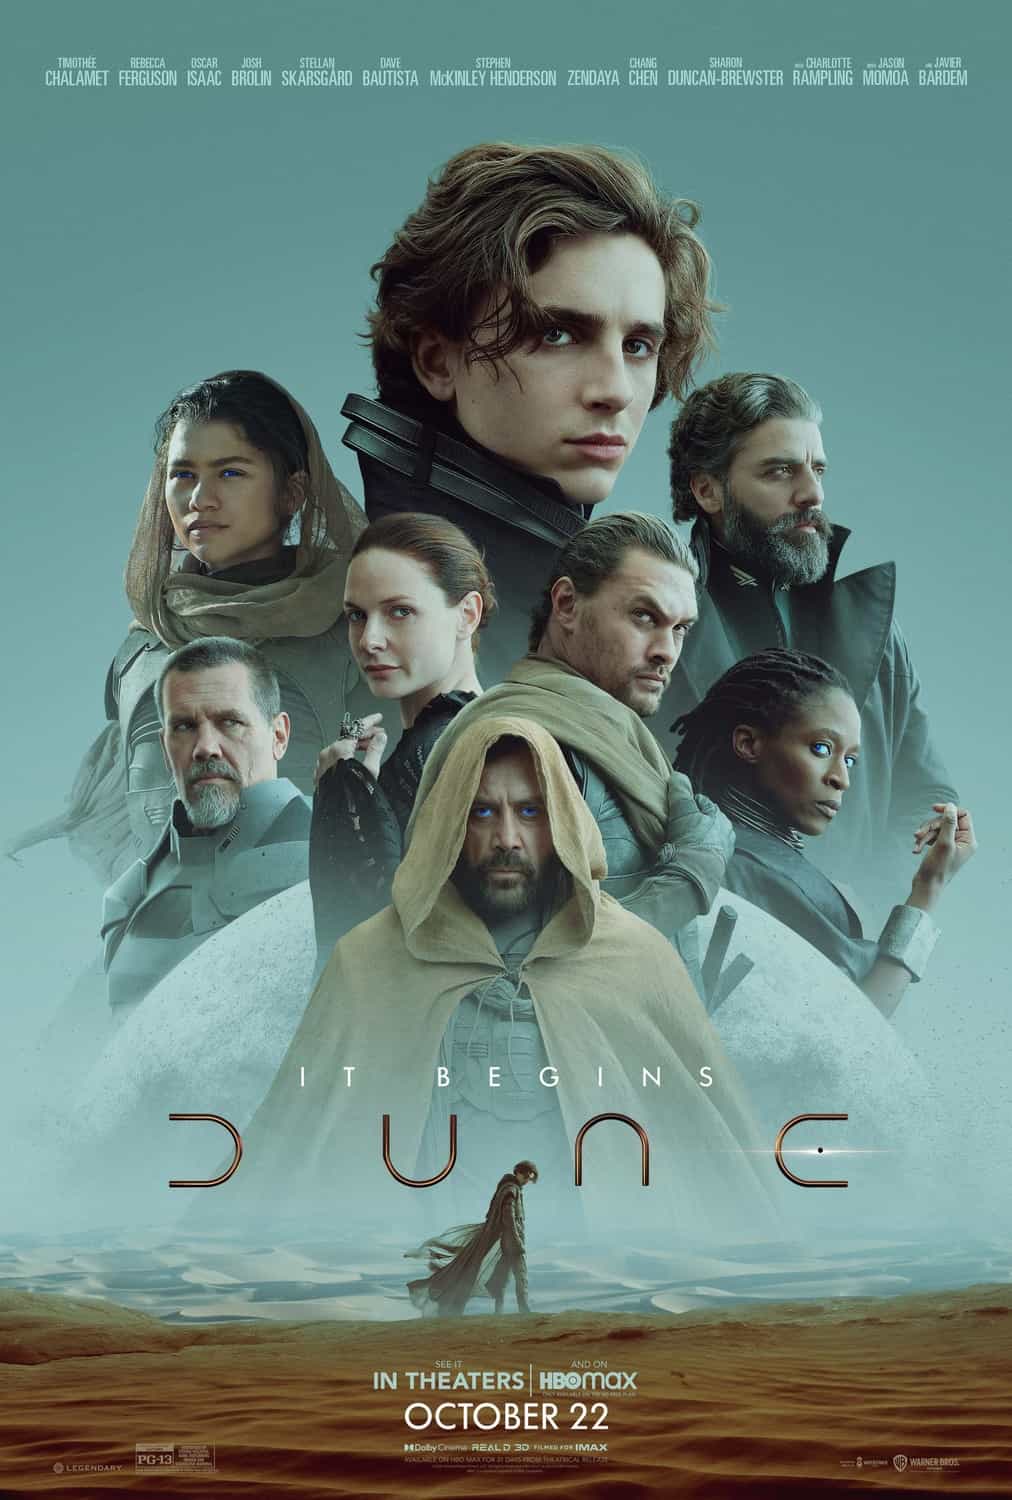 US Box Office Weekend Report 22nd - 24th October 2021:  Dune from director Denis Villeneuve makes its long awaited debut at the top of the North American box office